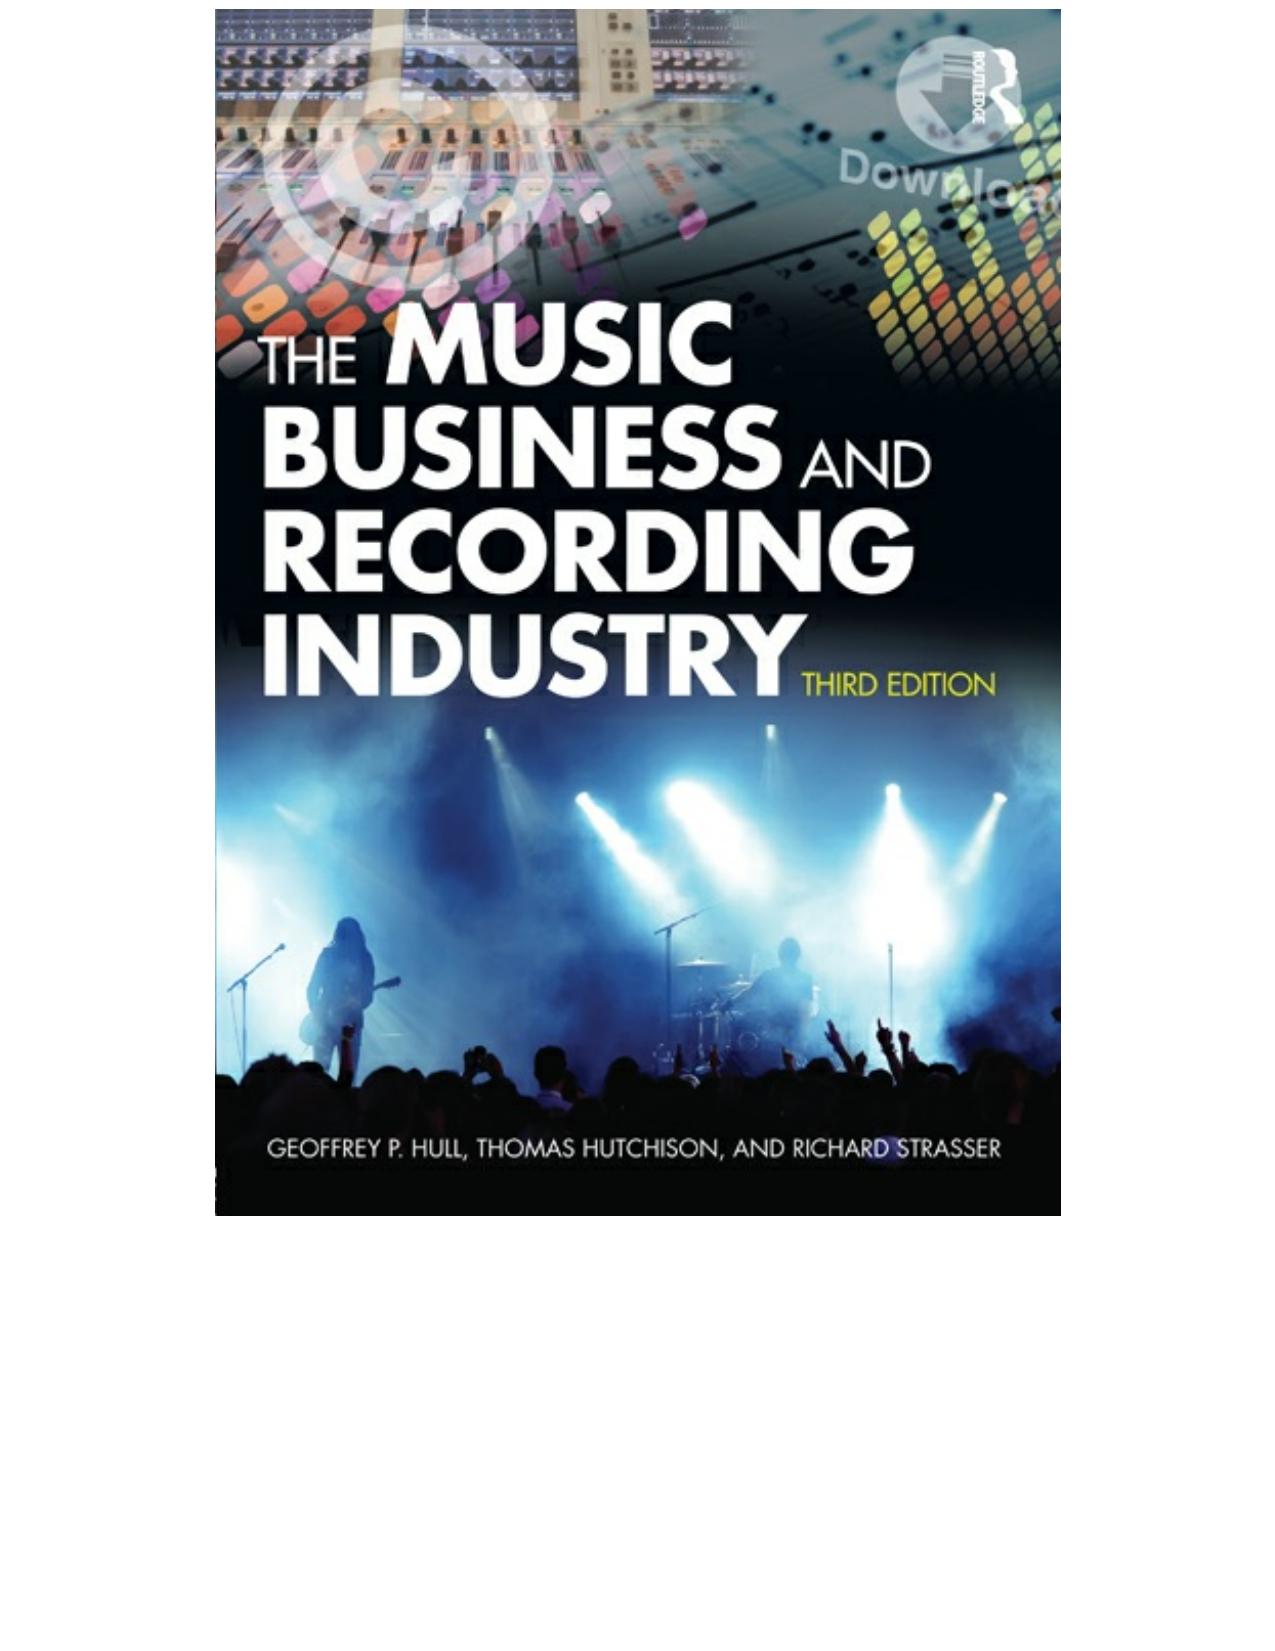 The Music and Recording Business by Geoffrey Hull & Thomas Hutchison & Richard Strasser